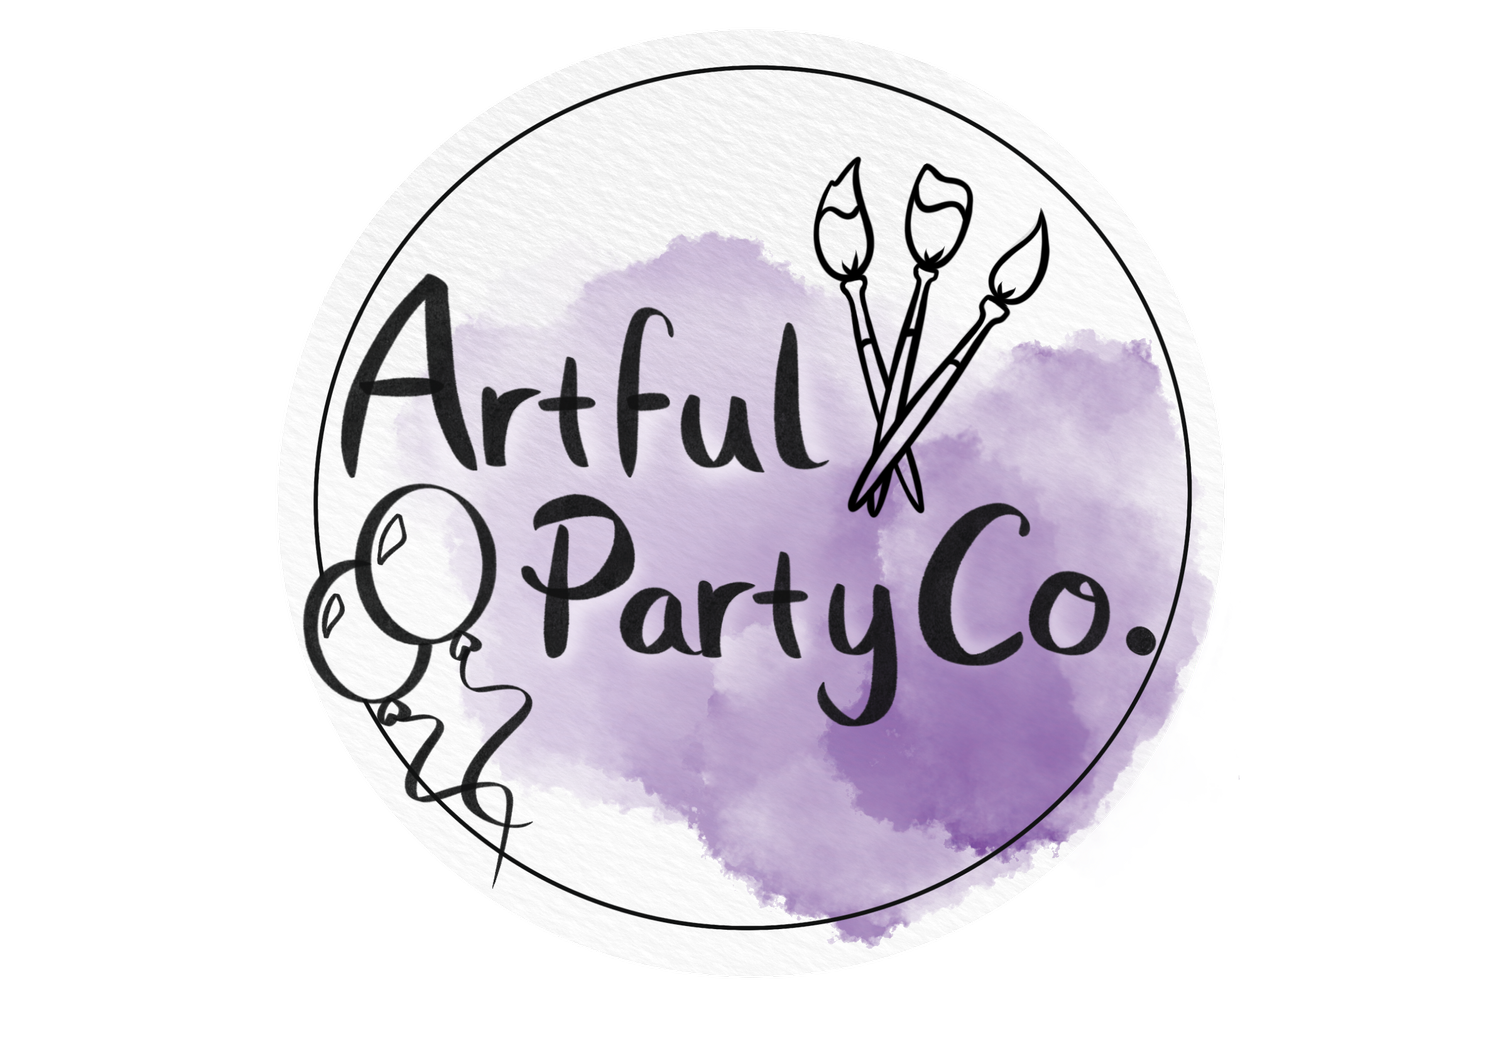 Professional Balloon Art and Face Painting in Houston, Texas | Artful Party Co.